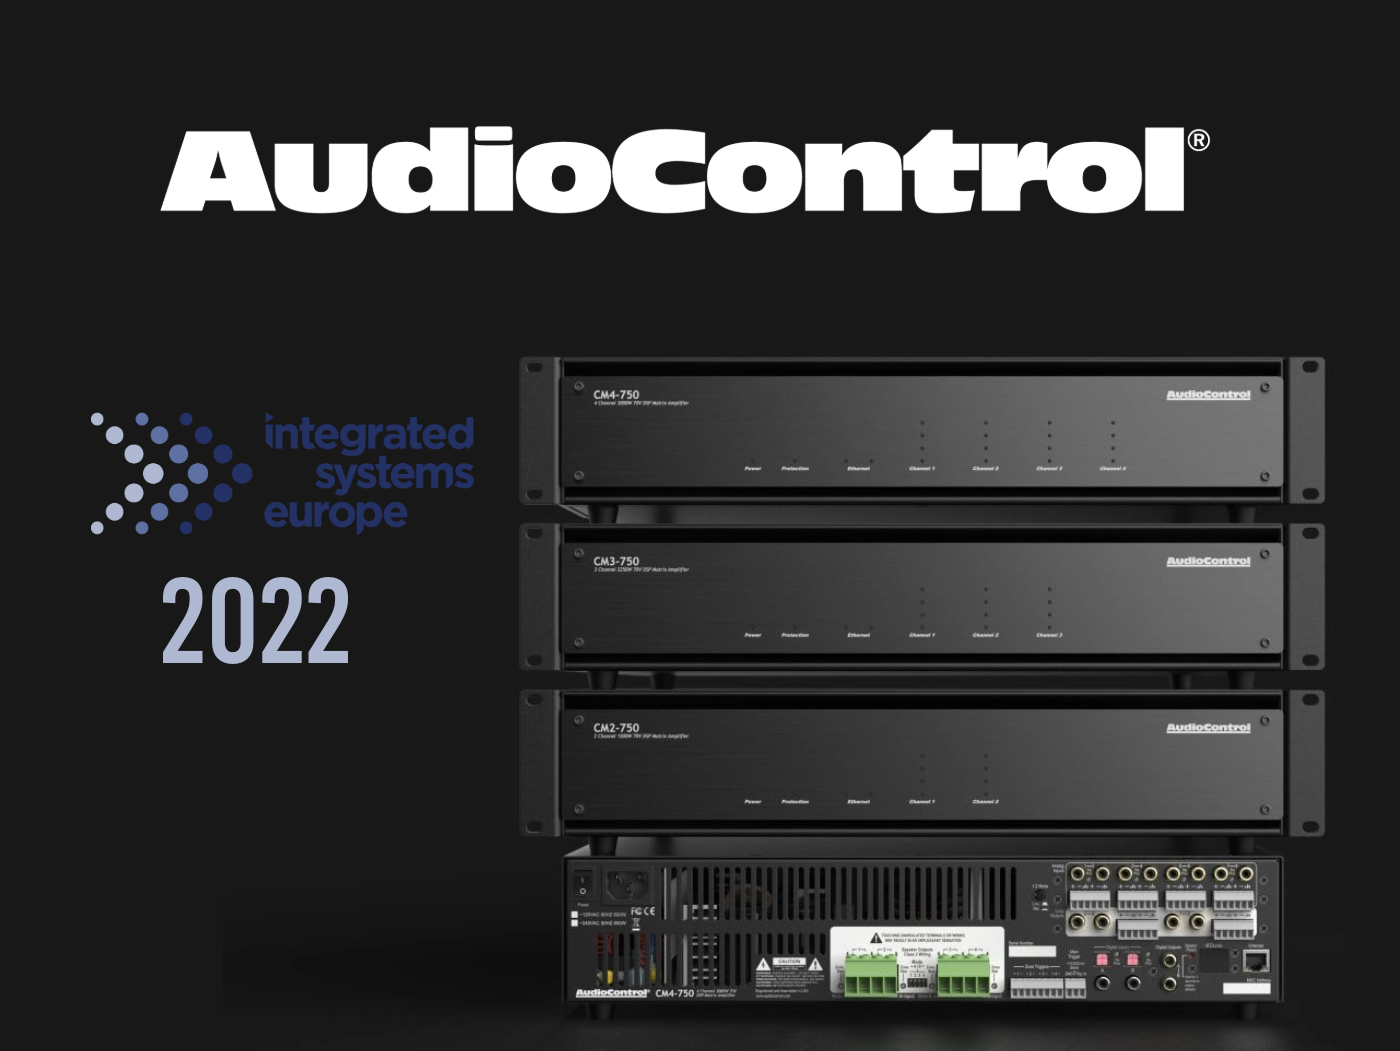 AudioControl’s Award-Winning Dual-Mode Amplifier Design on Display at ISE 2022 in Barcelona